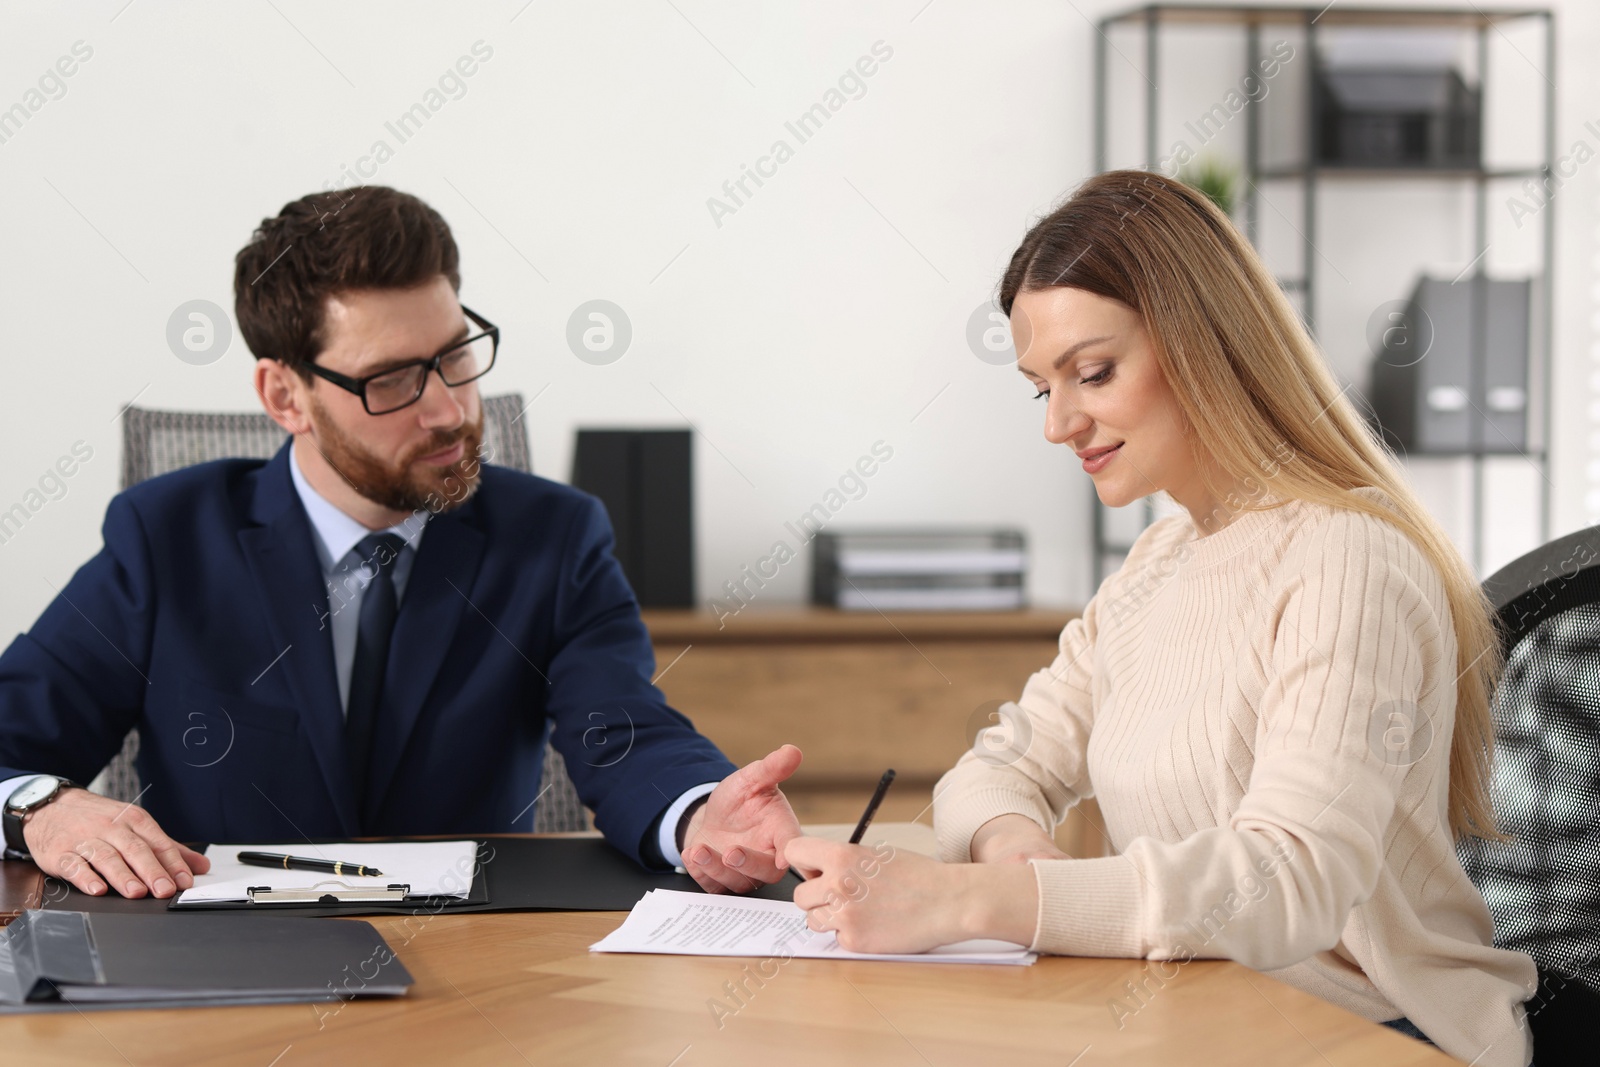 Photo of Woman signing document while having meeting with lawyer in office